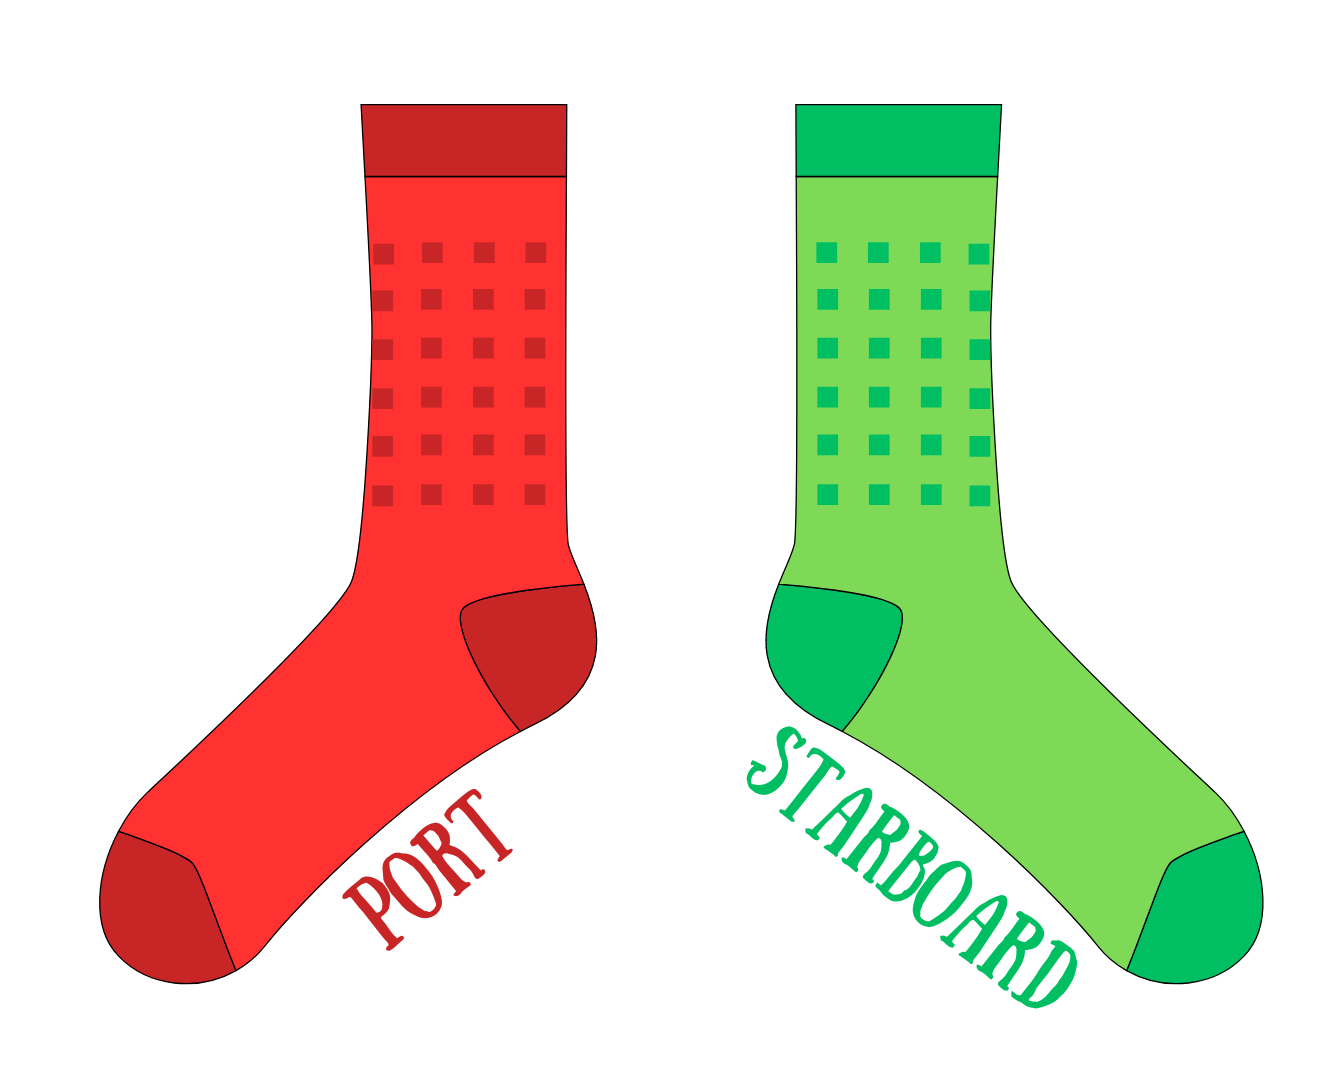 Port and starboard - red sock on the left for port and green sock on the right for starboard